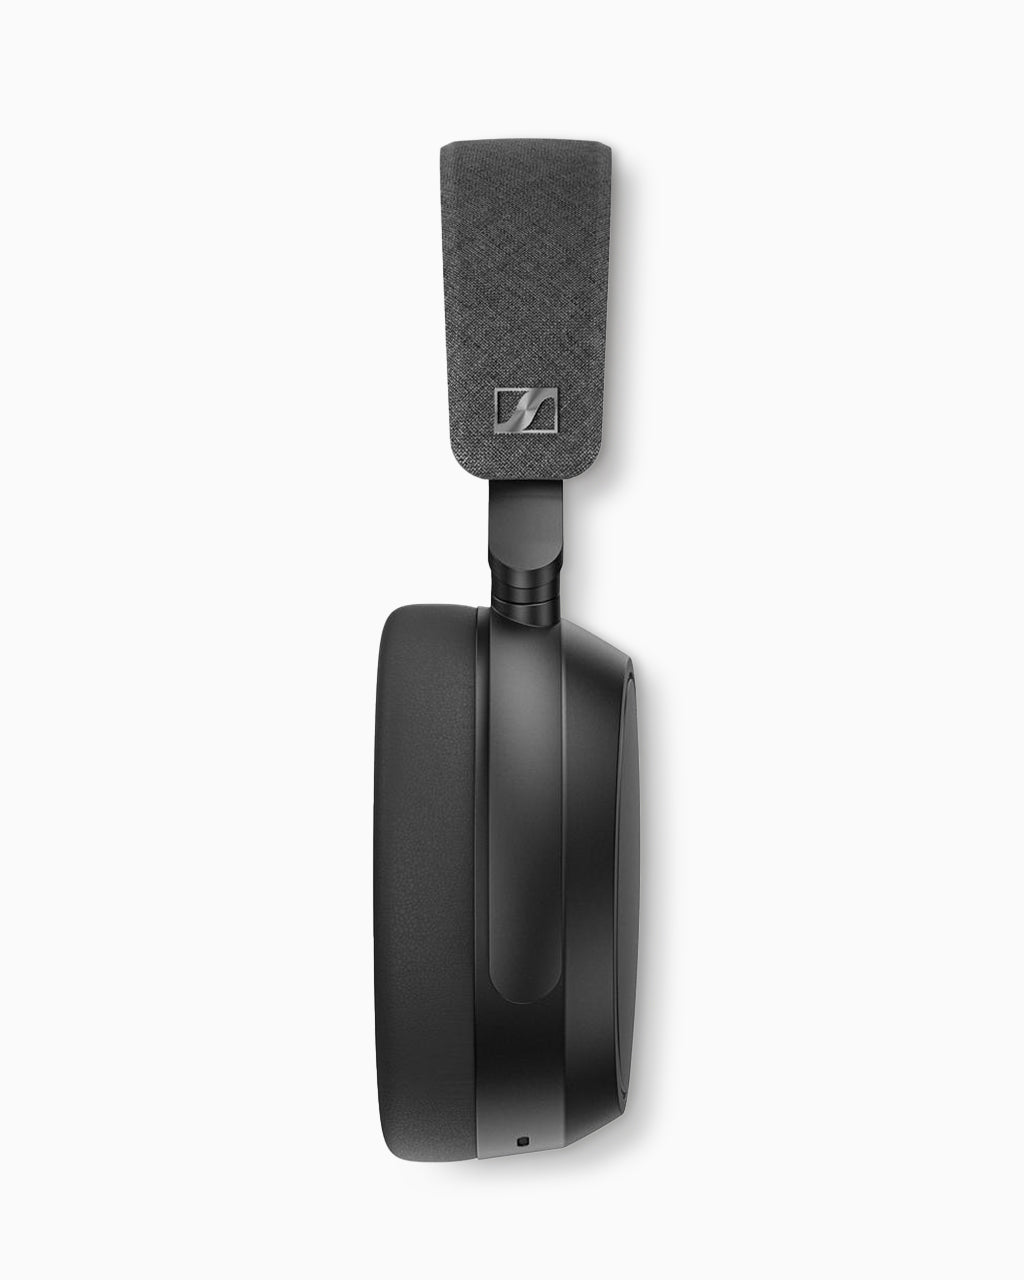 Does the Sennheiser Momentum 4 Have a Microphone?